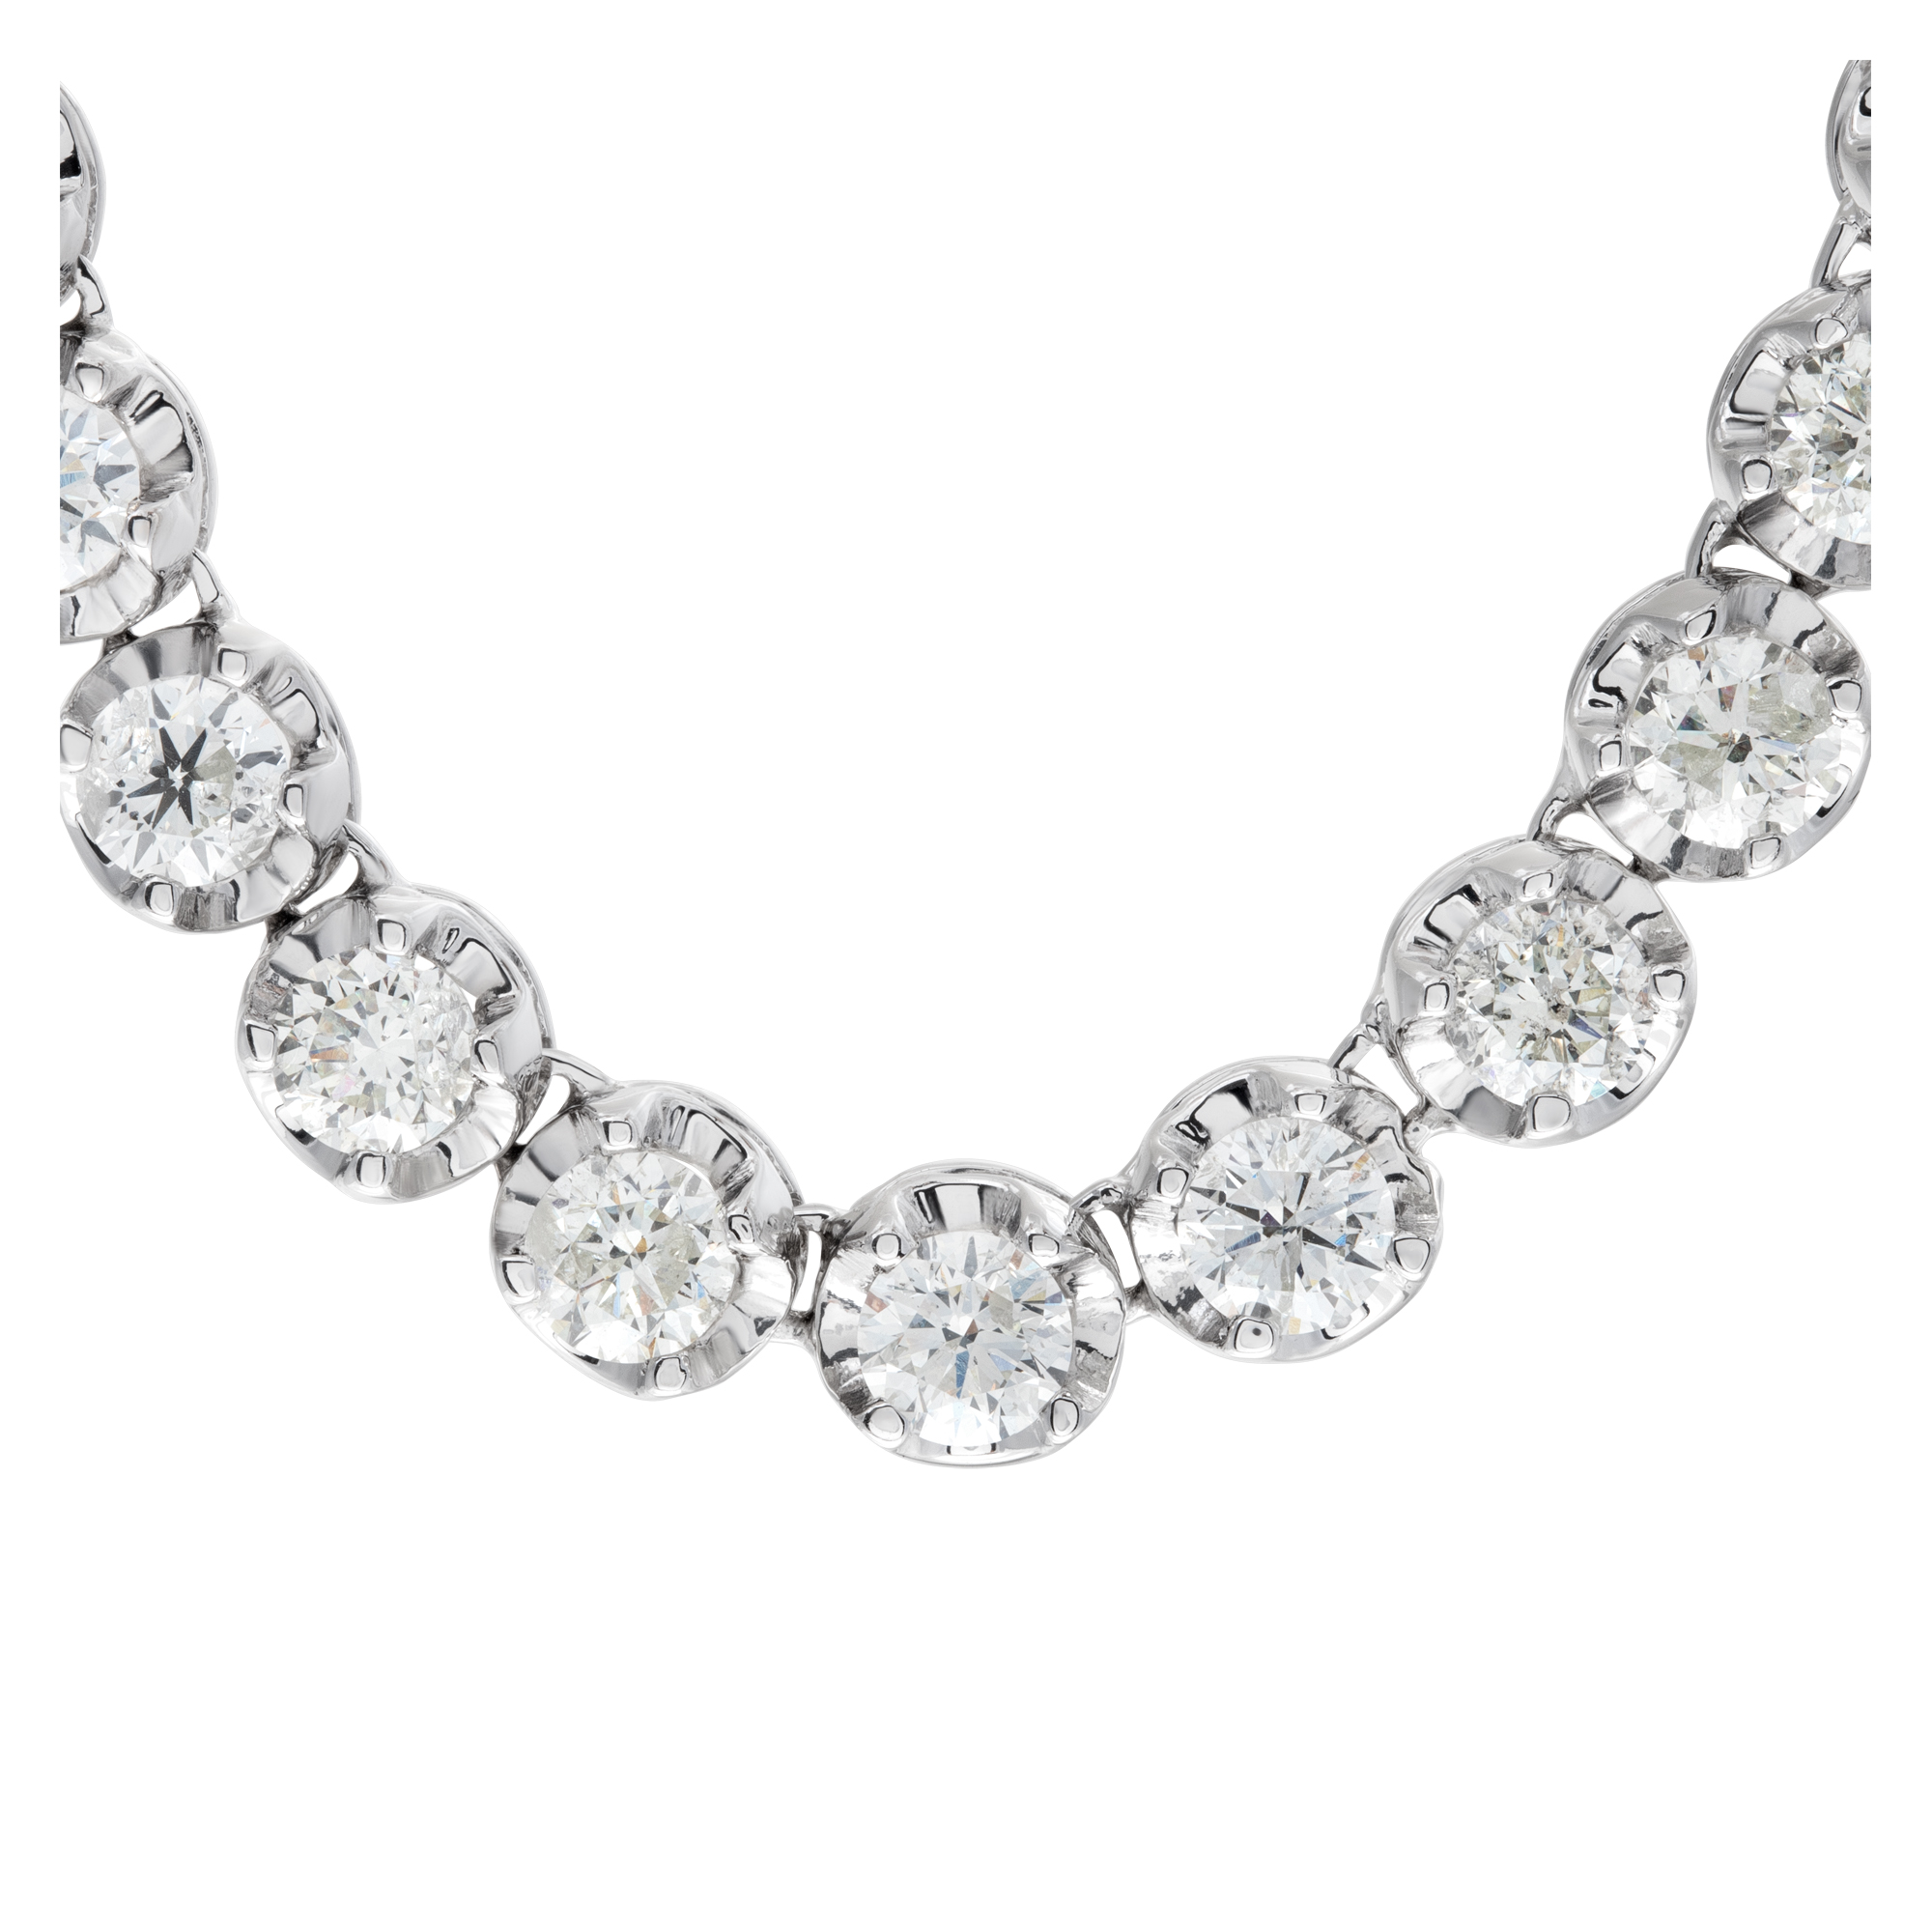 Sparkling line diamond necklace with 22.56 carats full cut round brilliant diamonds set in 14K white gold. image 1